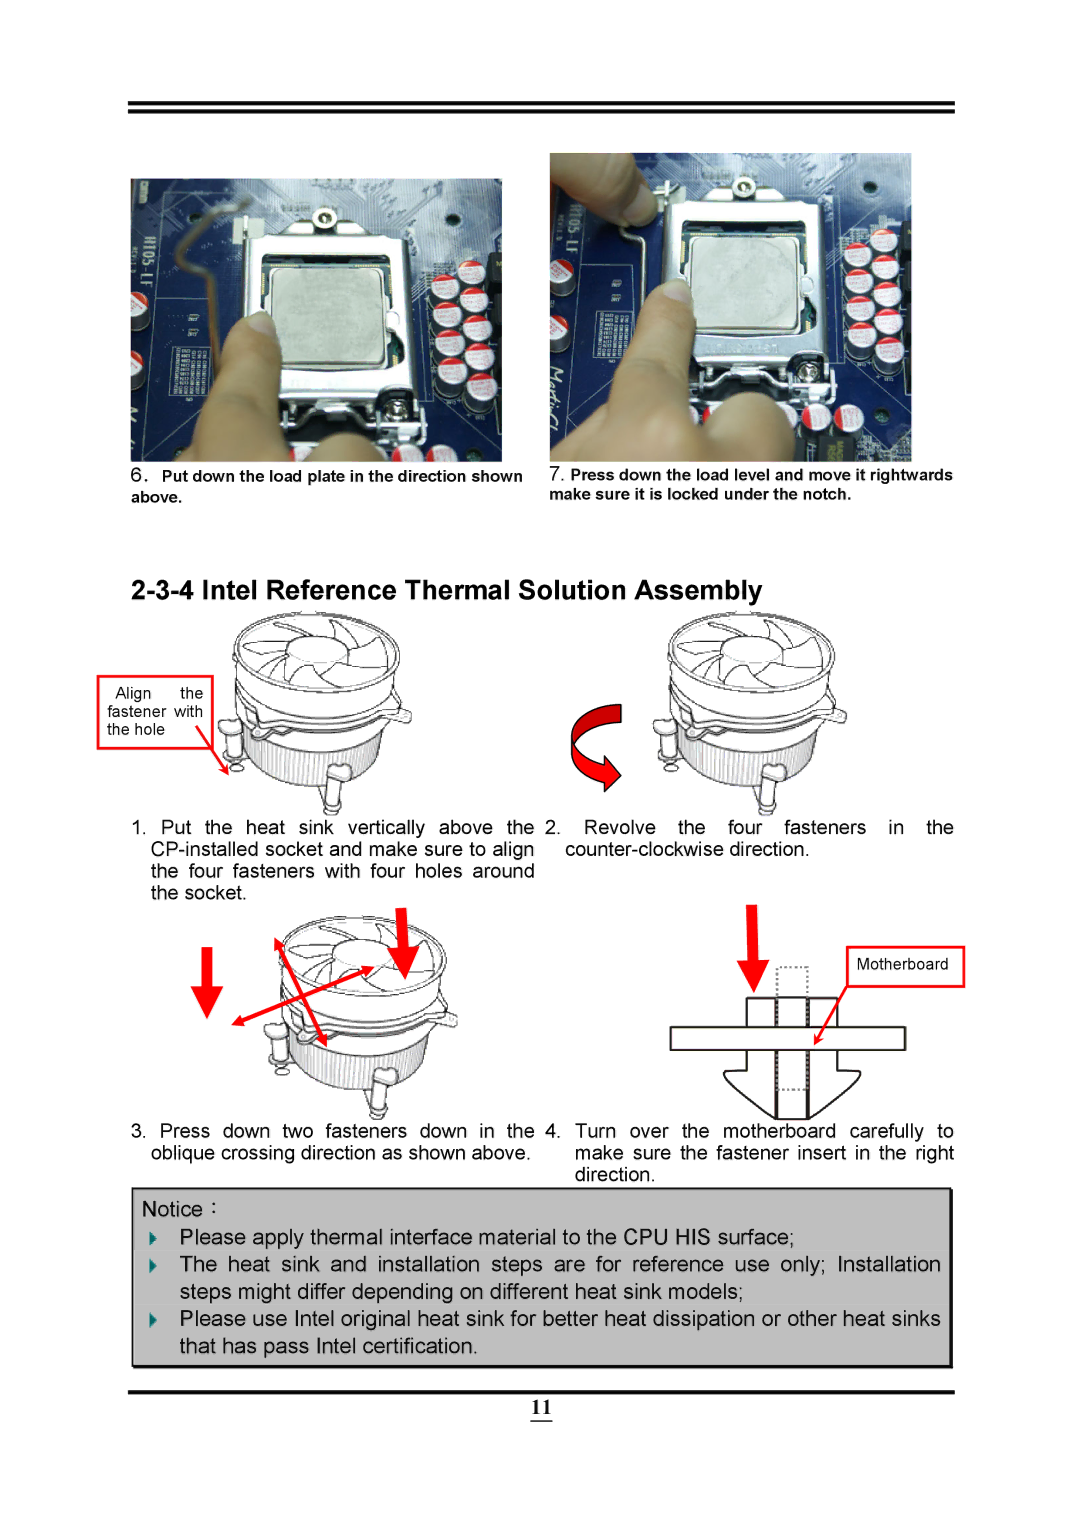 Intel PMH55 user manual Intel Reference Thermal Solution Assembly 